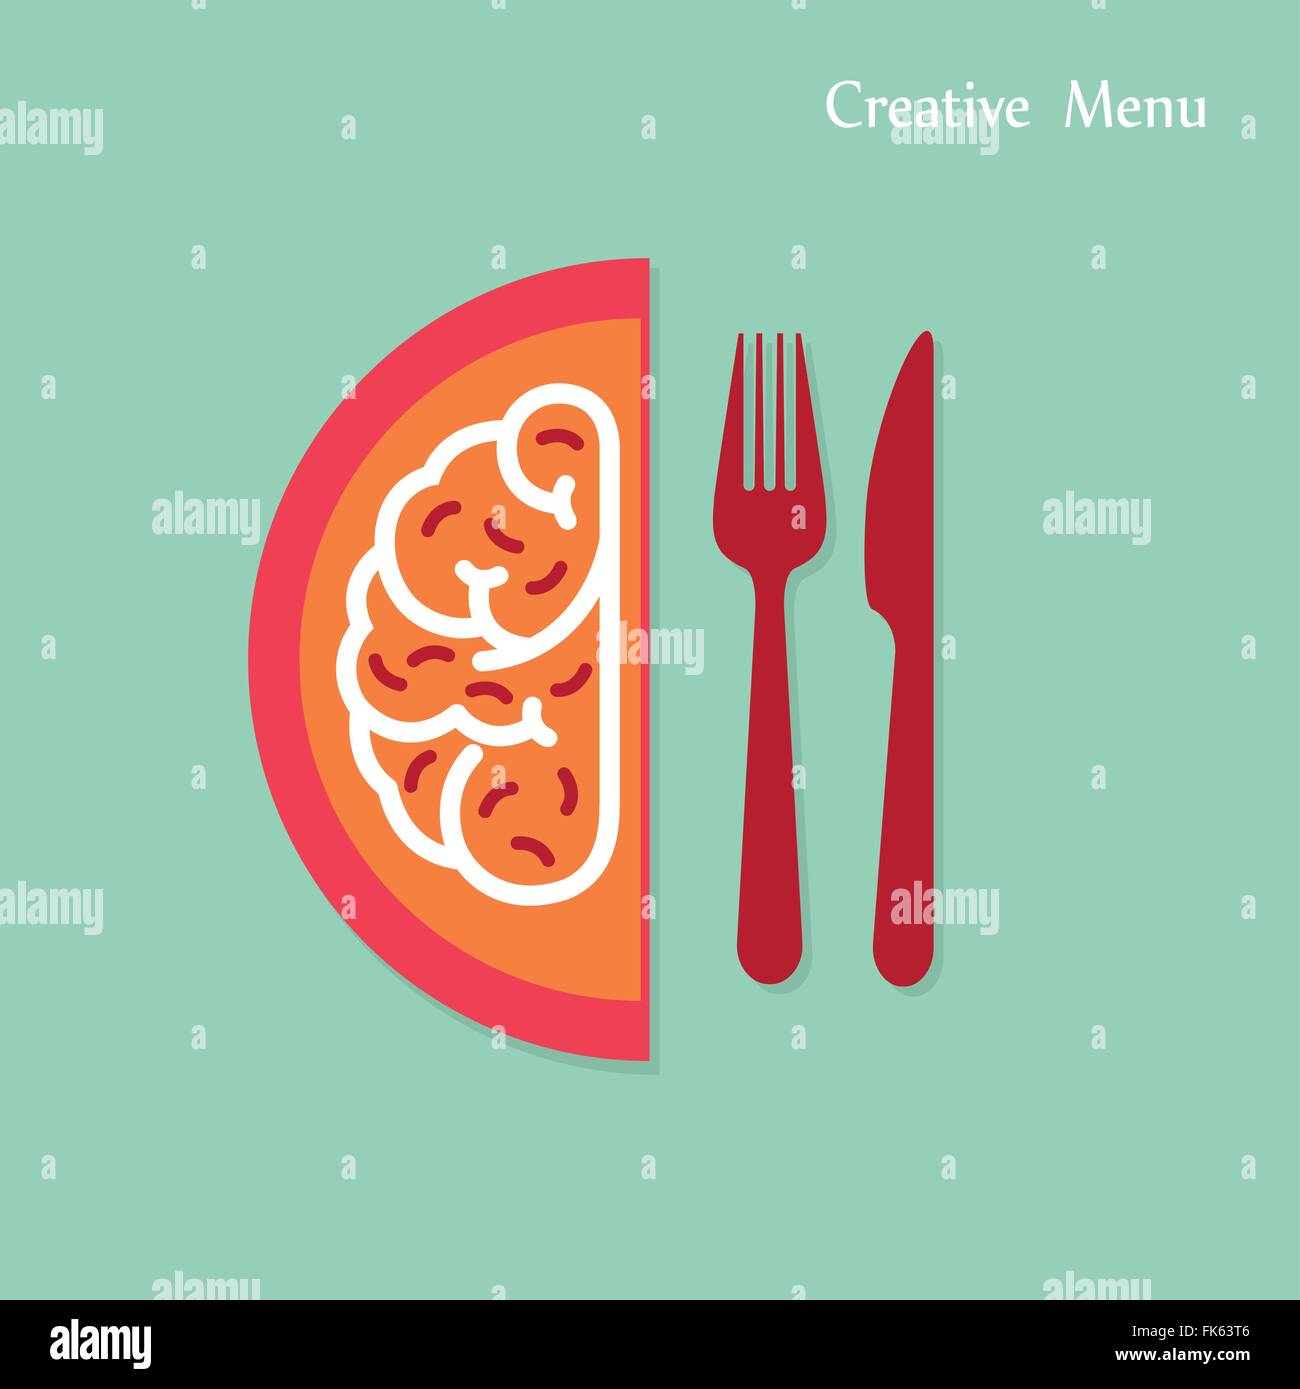 Creative brain Idea concept with fork and knife sign on background. Creativity menu concepts, business concept.Vector illustrati Stock Vector